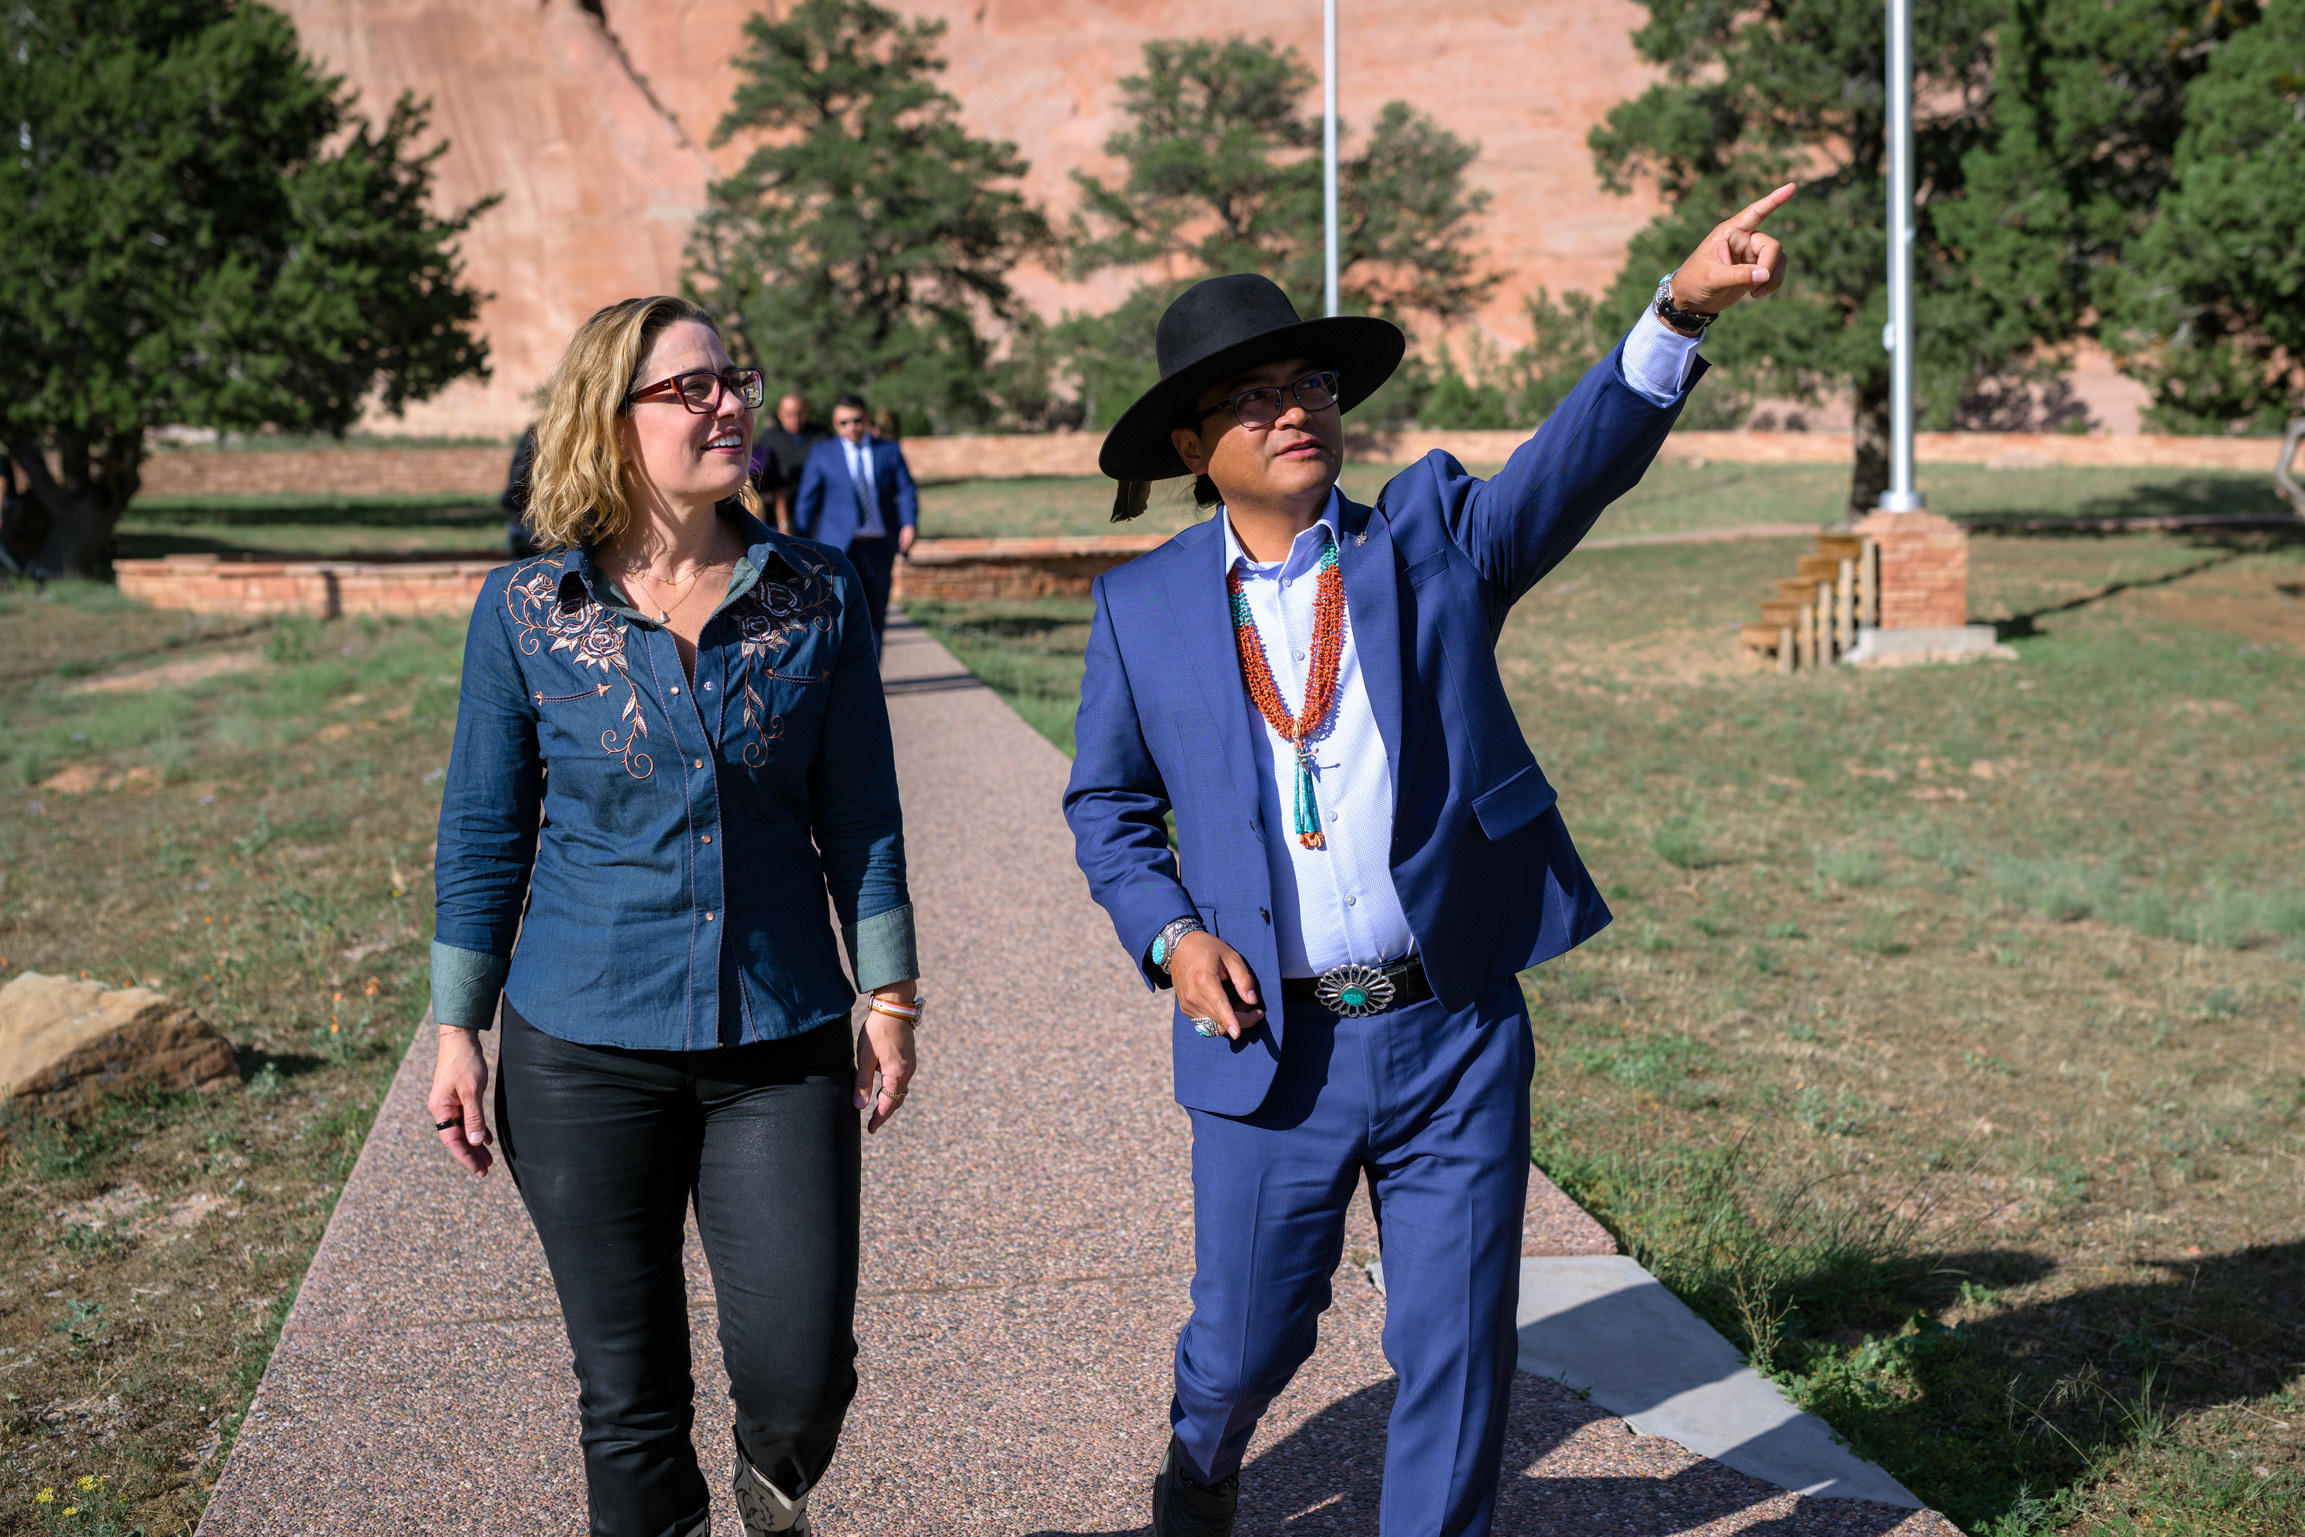 Senator toured the Navajo-Gallup Water Supply Project that was funded through her landmark bipartisan infrastructure law – securing a strong water supply for the Nation.